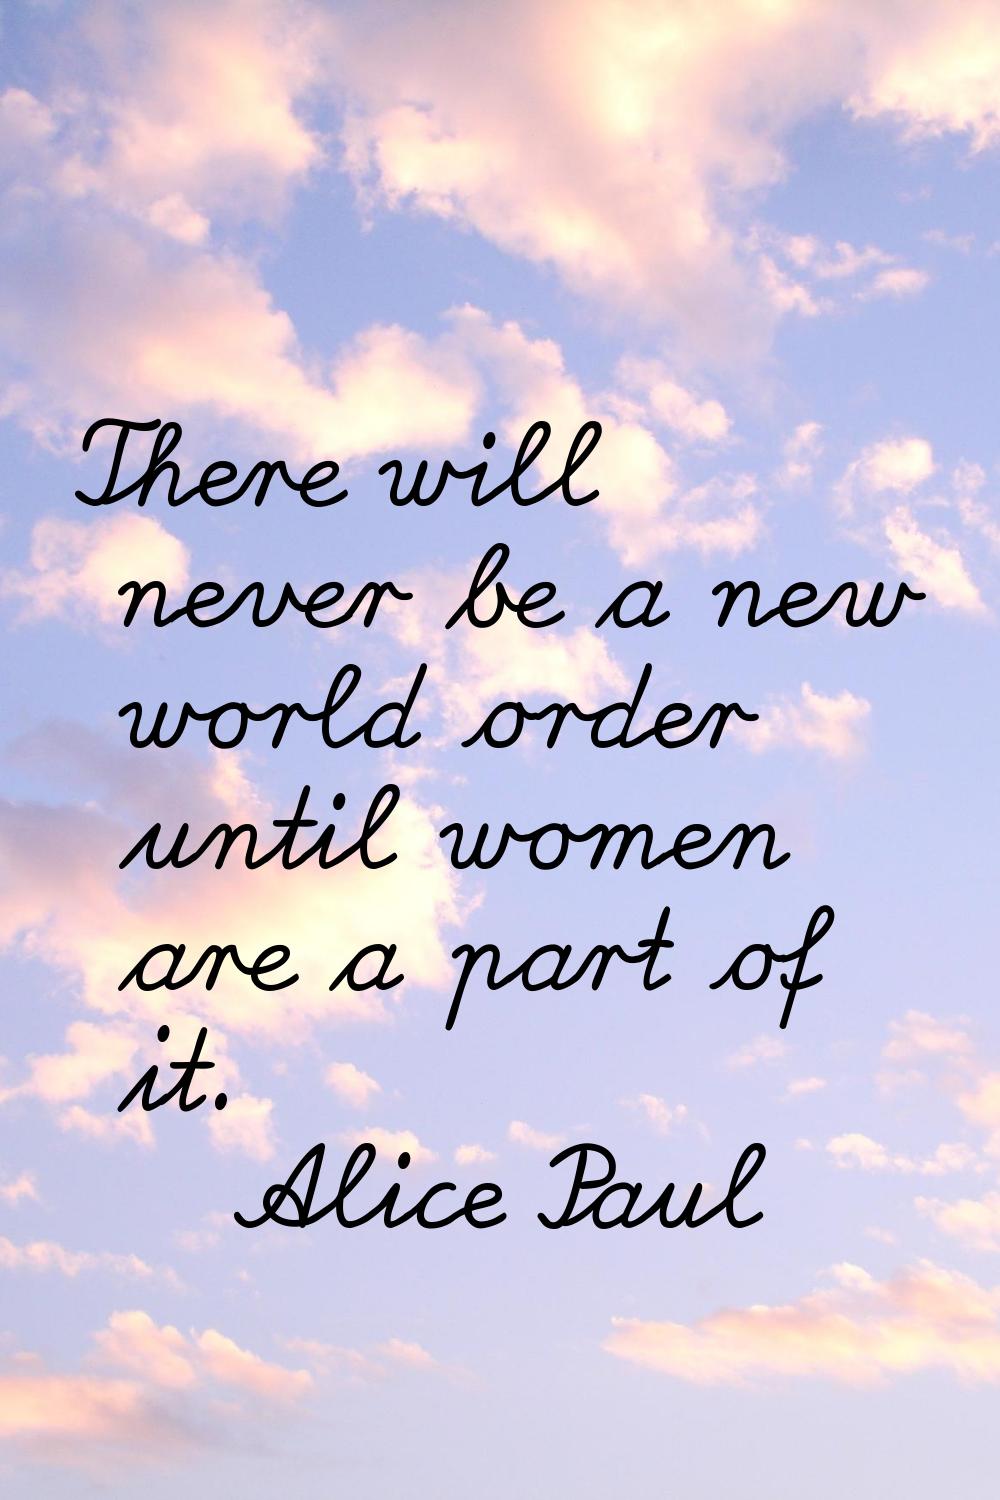 There will never be a new world order until women are a part of it.